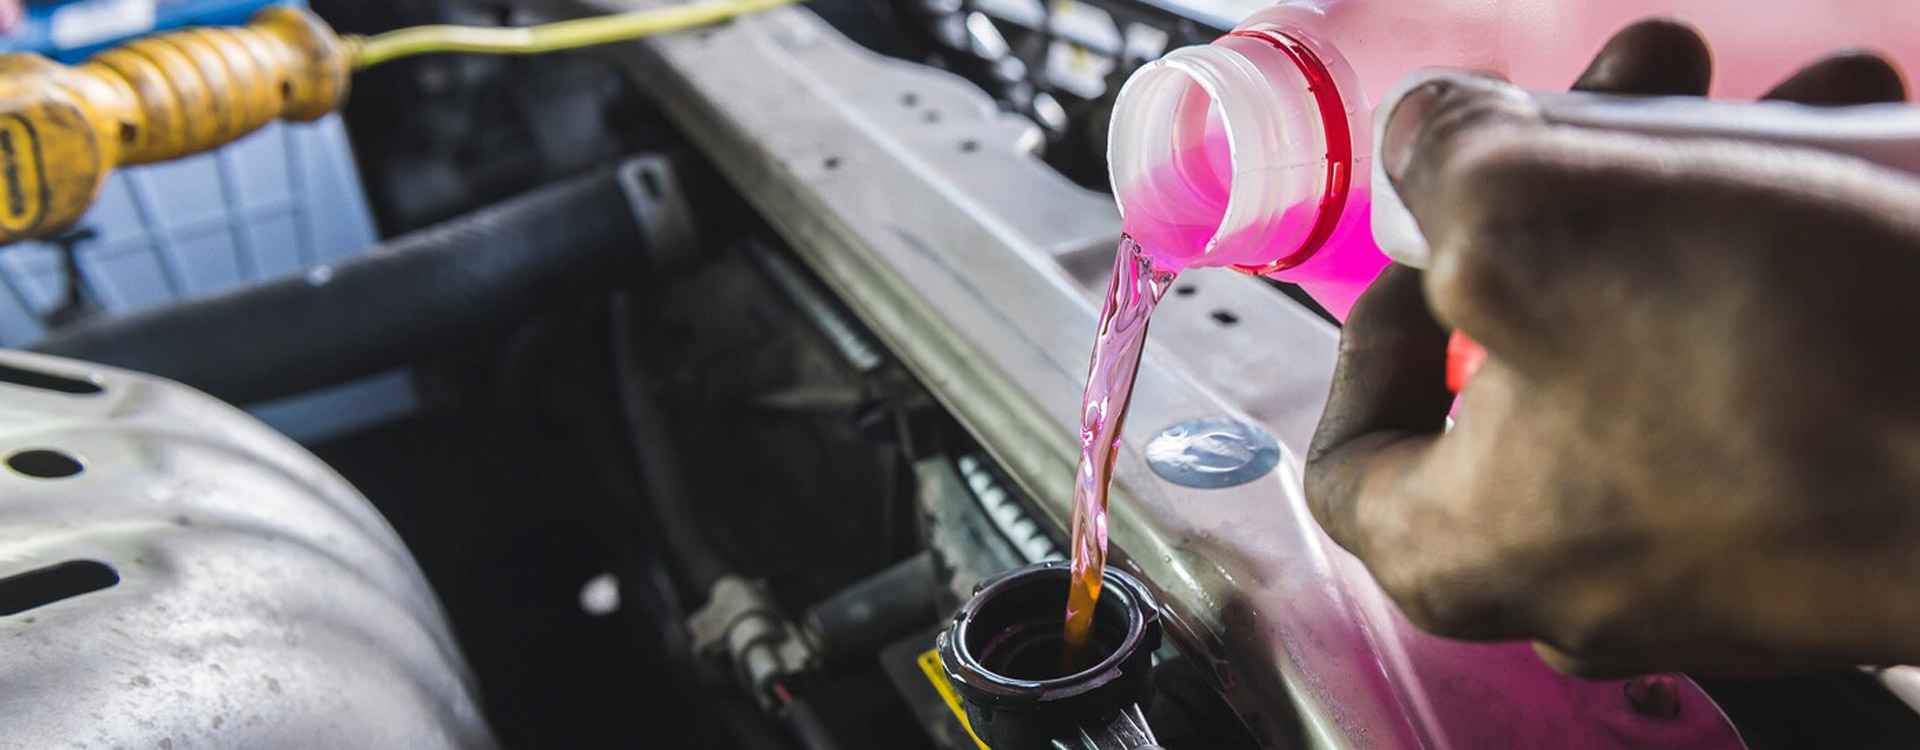 Glycerin-based coolant being put into car